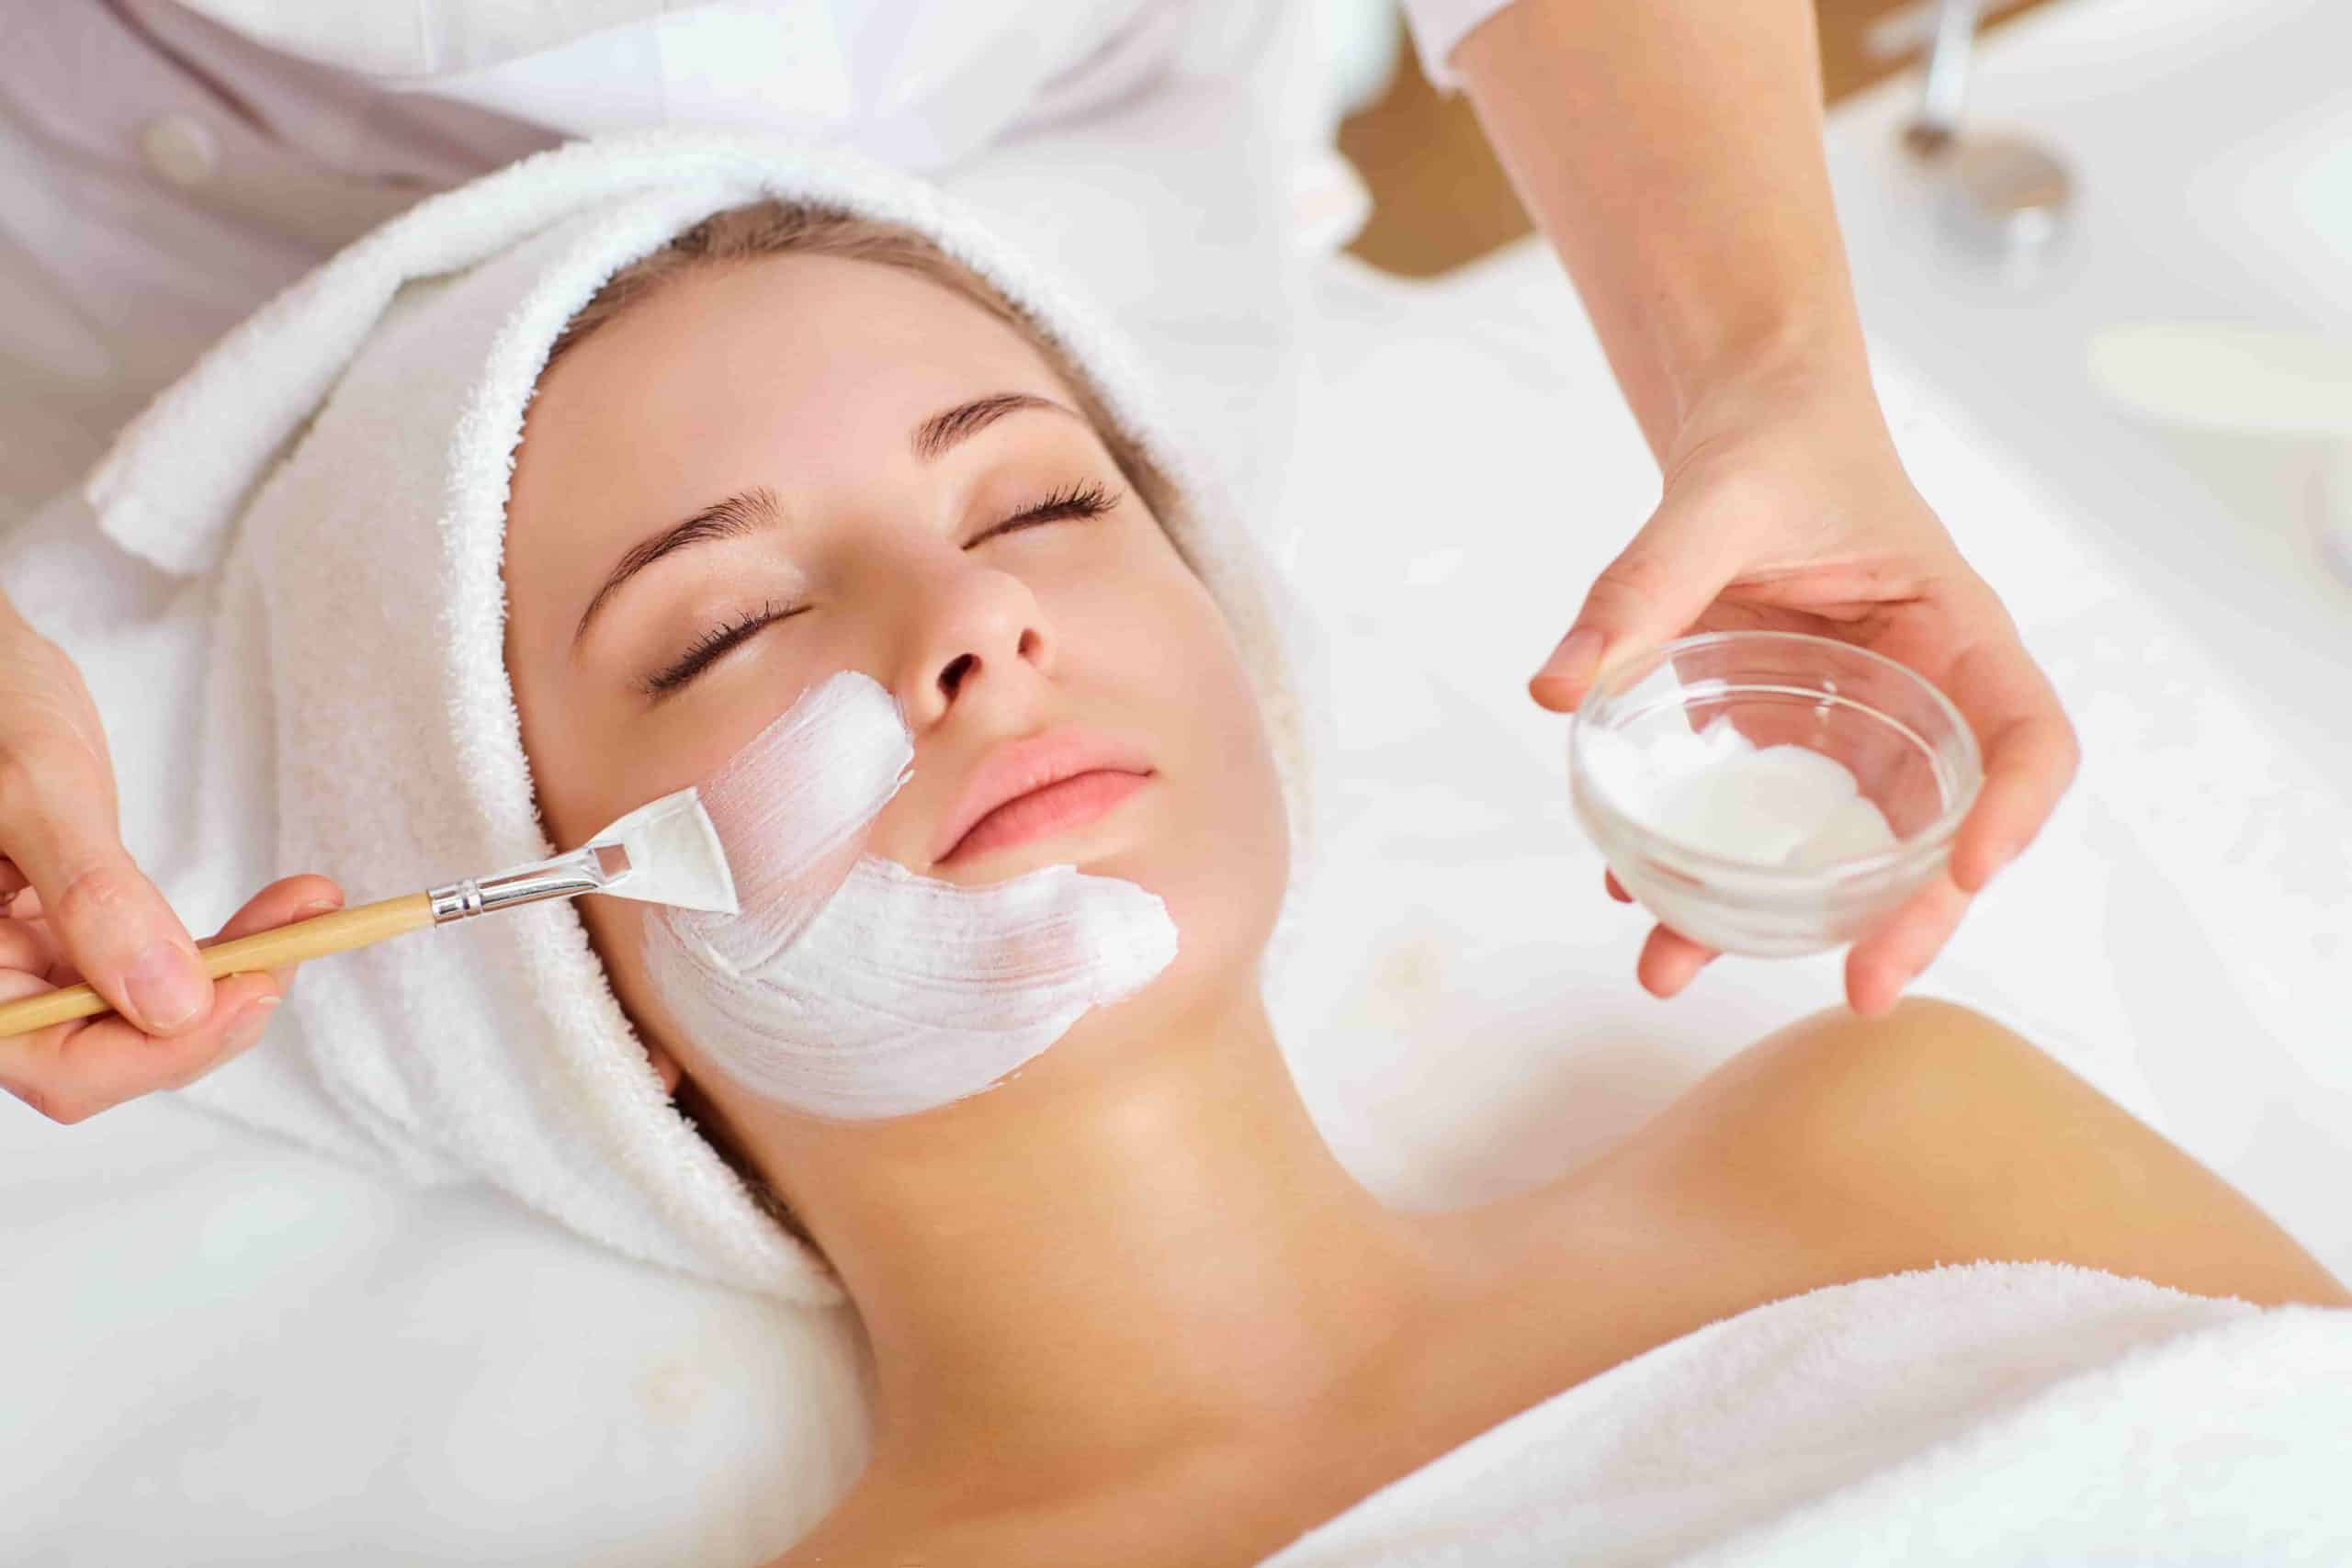 Aquagold Facial The Golden Ticket to Rejuvenated and Glowing Skin